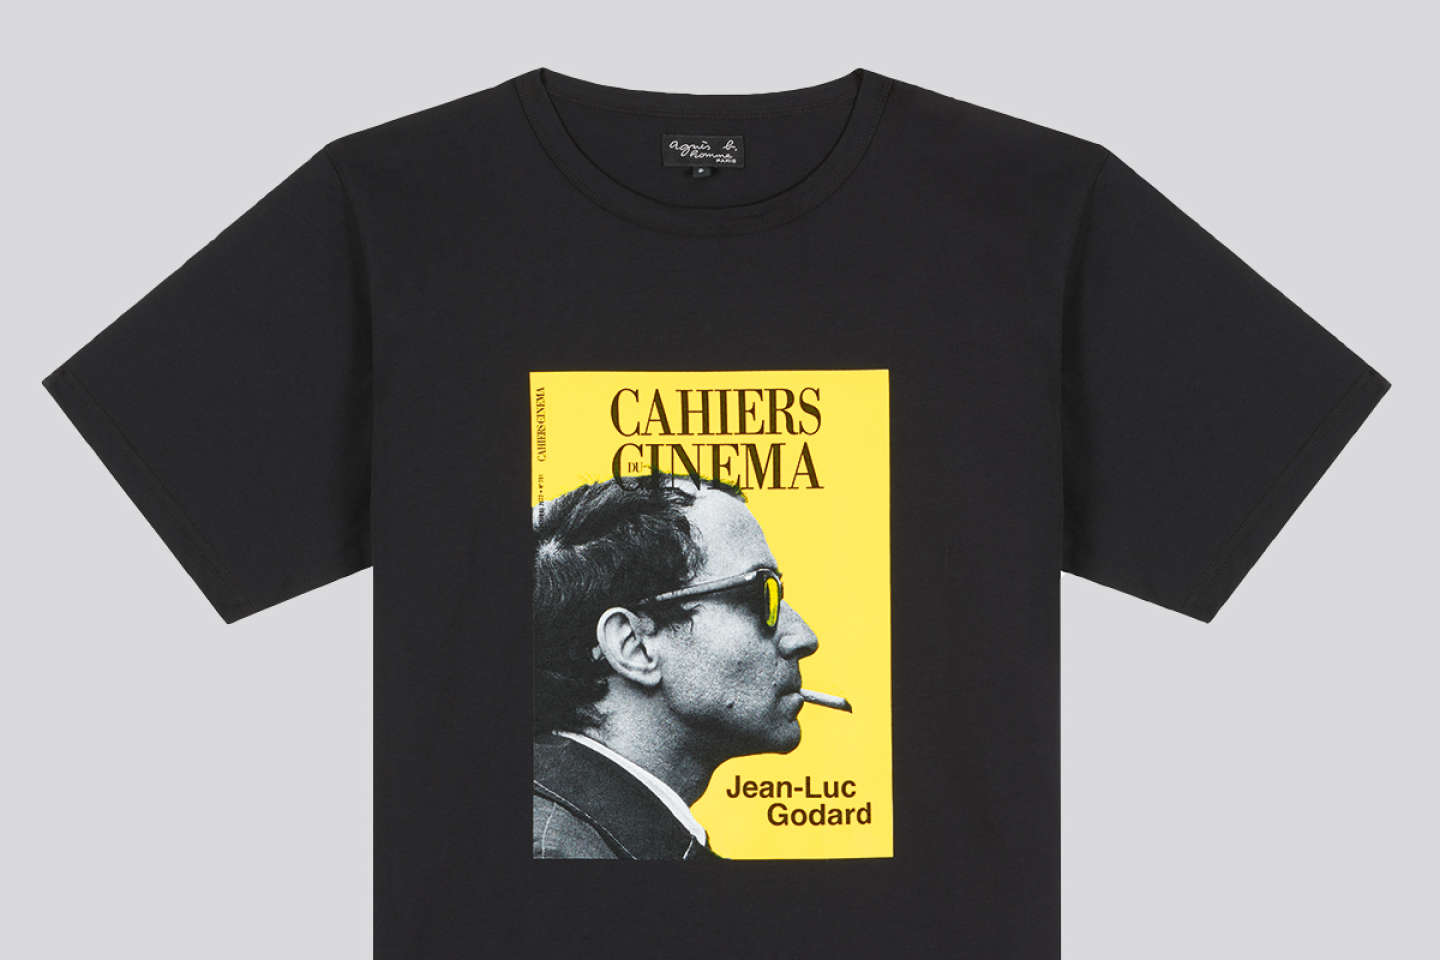 For the Cannes Film Festival, Agnès B. releases her Cahiers